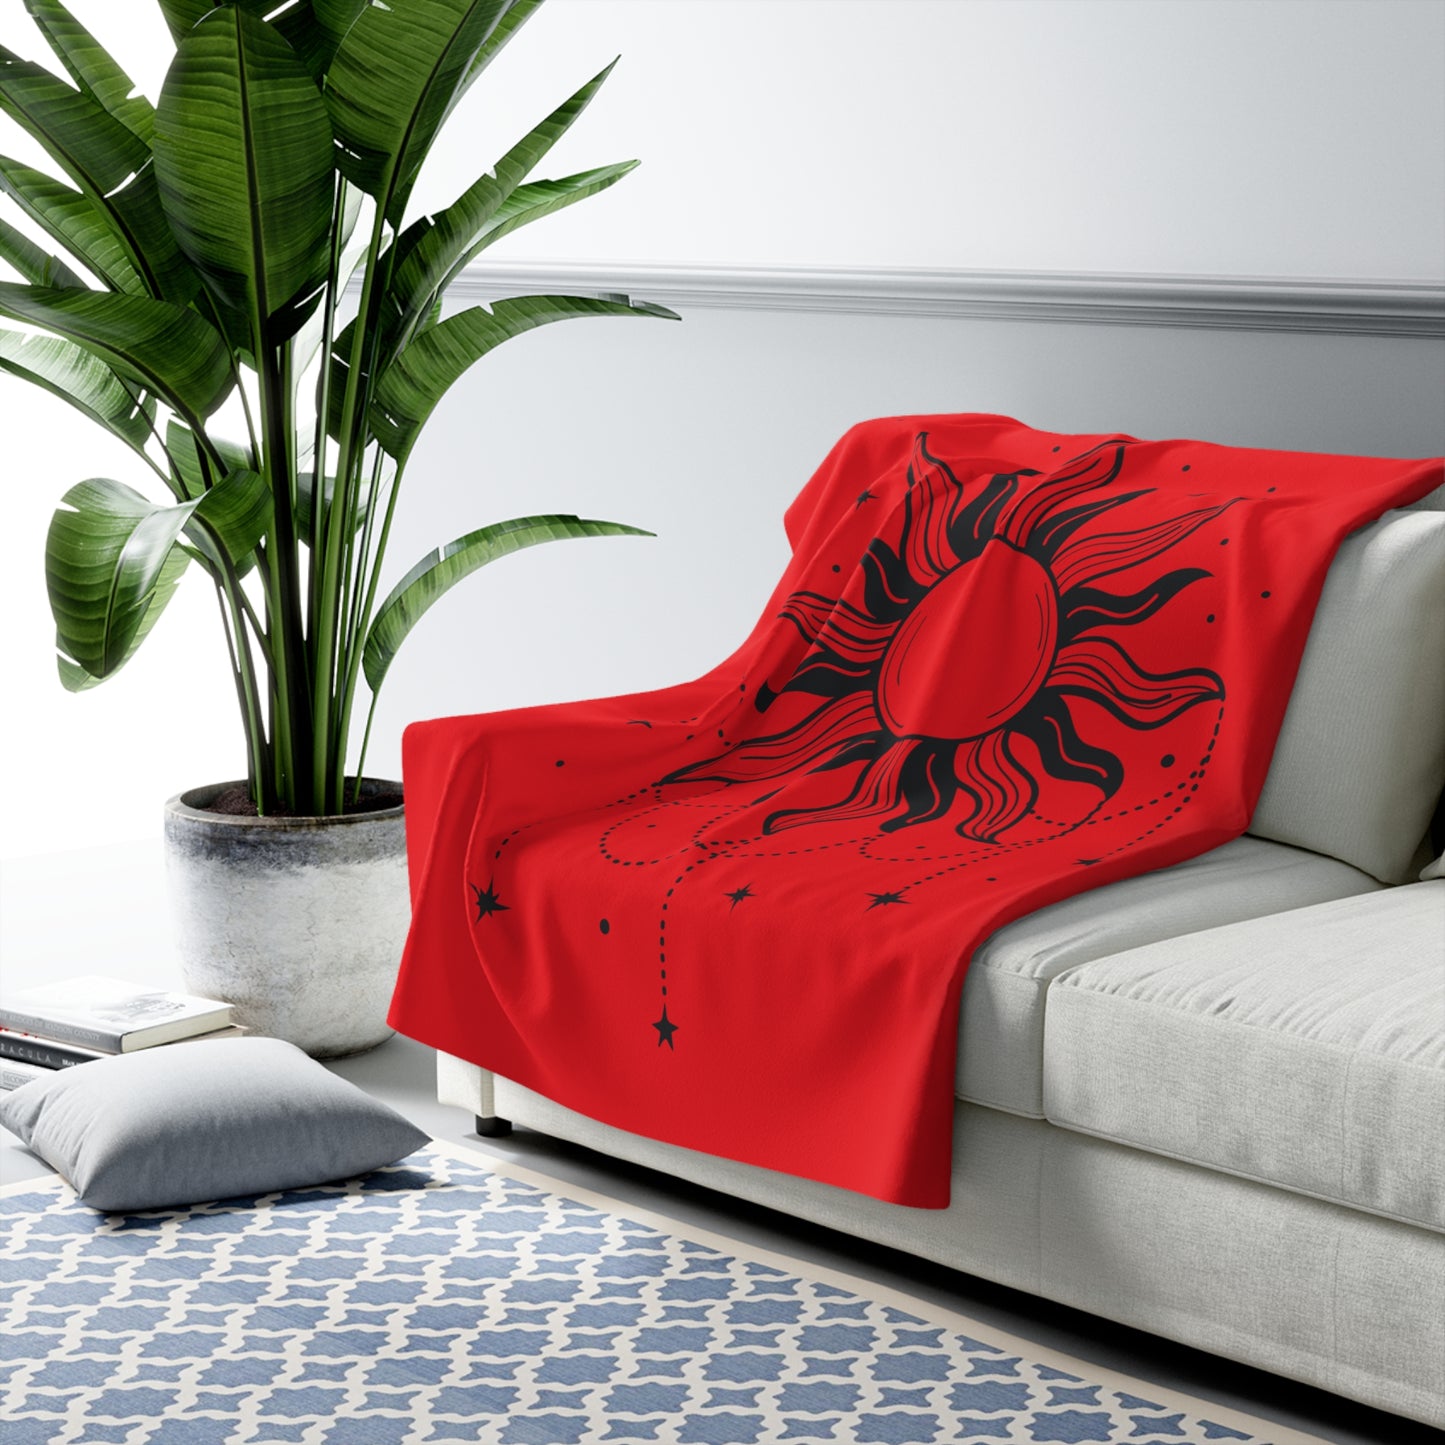 LUXURIOUS COZY BLANKET: THE EPITOME OF COMFORT AND WARMTH | Dream catcher red 